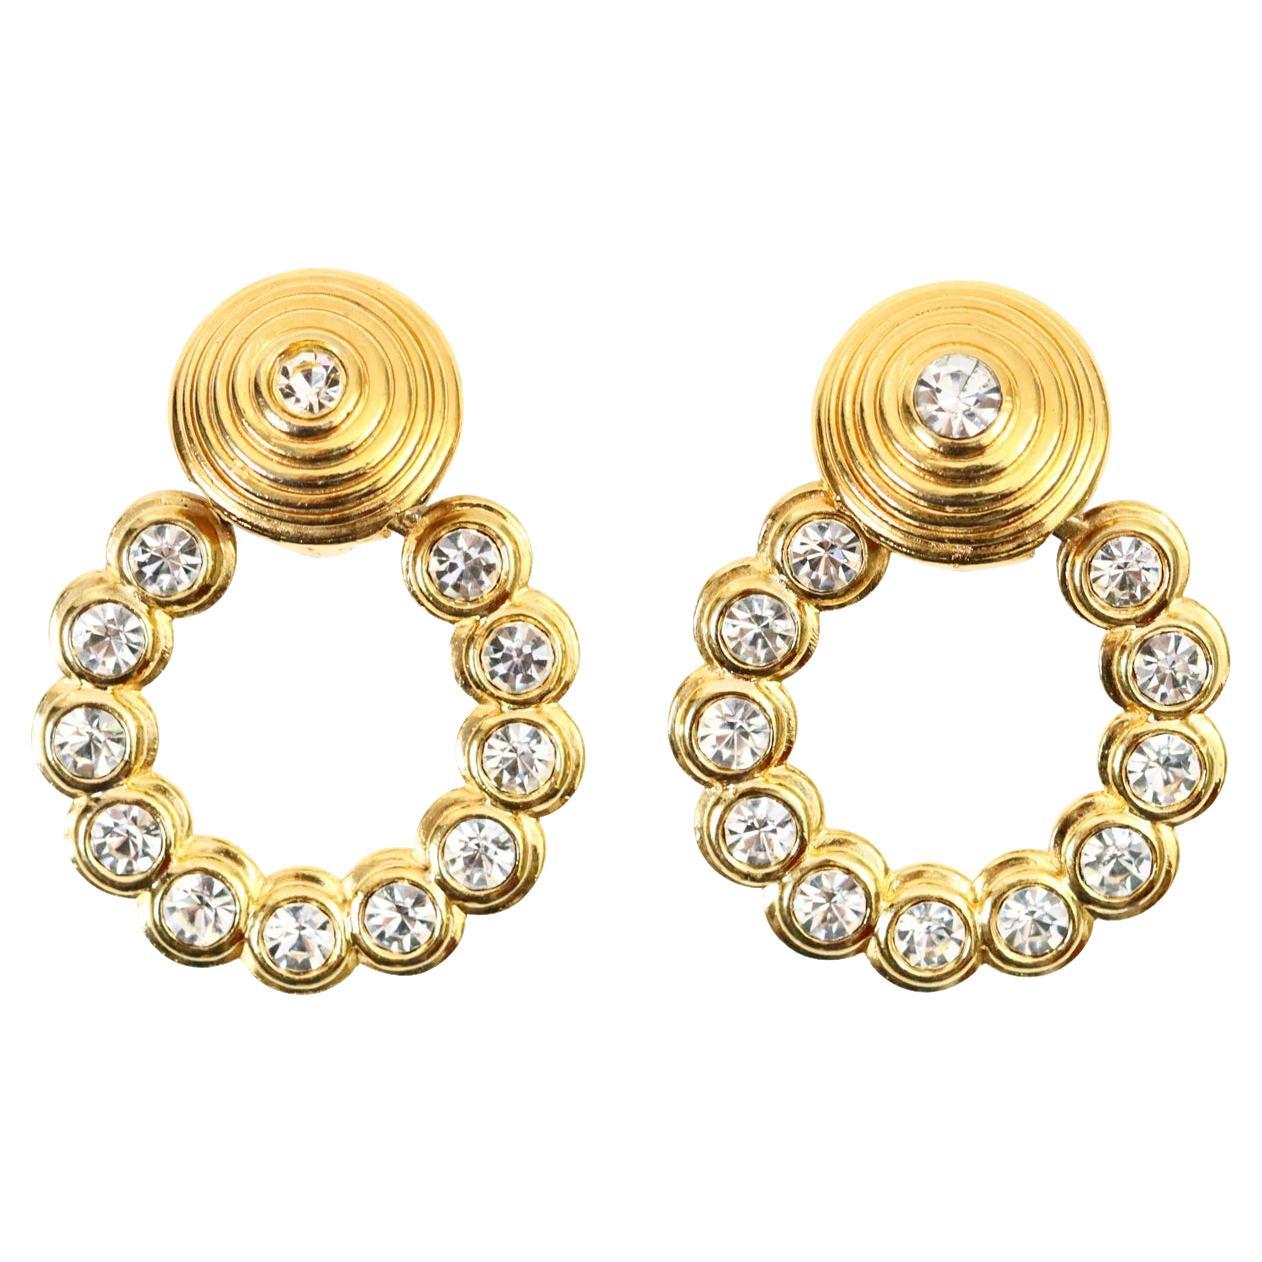 Large Gold Chanel Earrings - 375 For Sale on 1stDibs